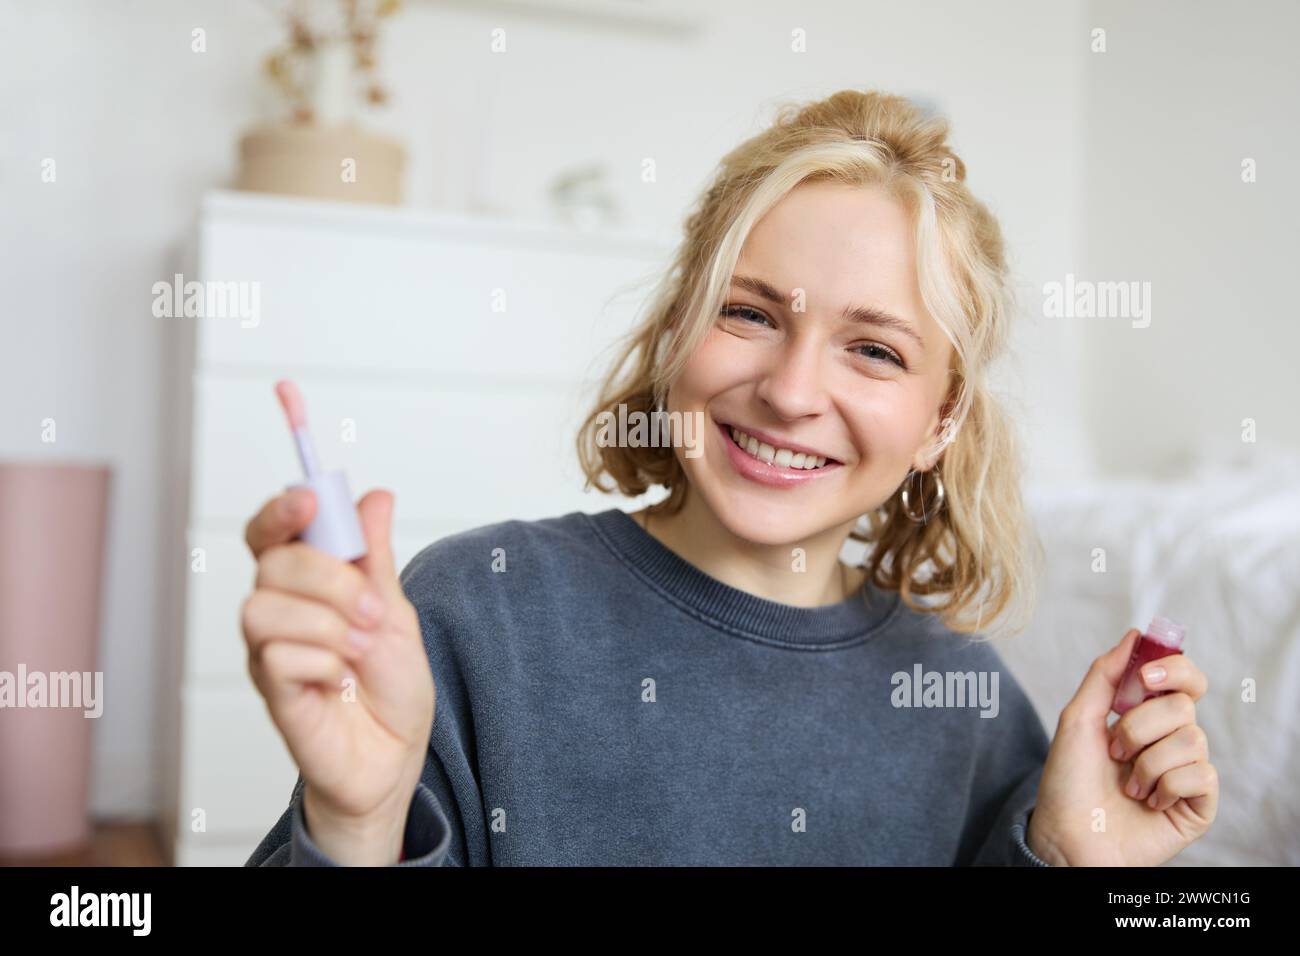 Close up portrait of woman recording a video of herself, holding beauty product, recommending lip gloss, content maker advertising makeup on her blog, Stock Photo